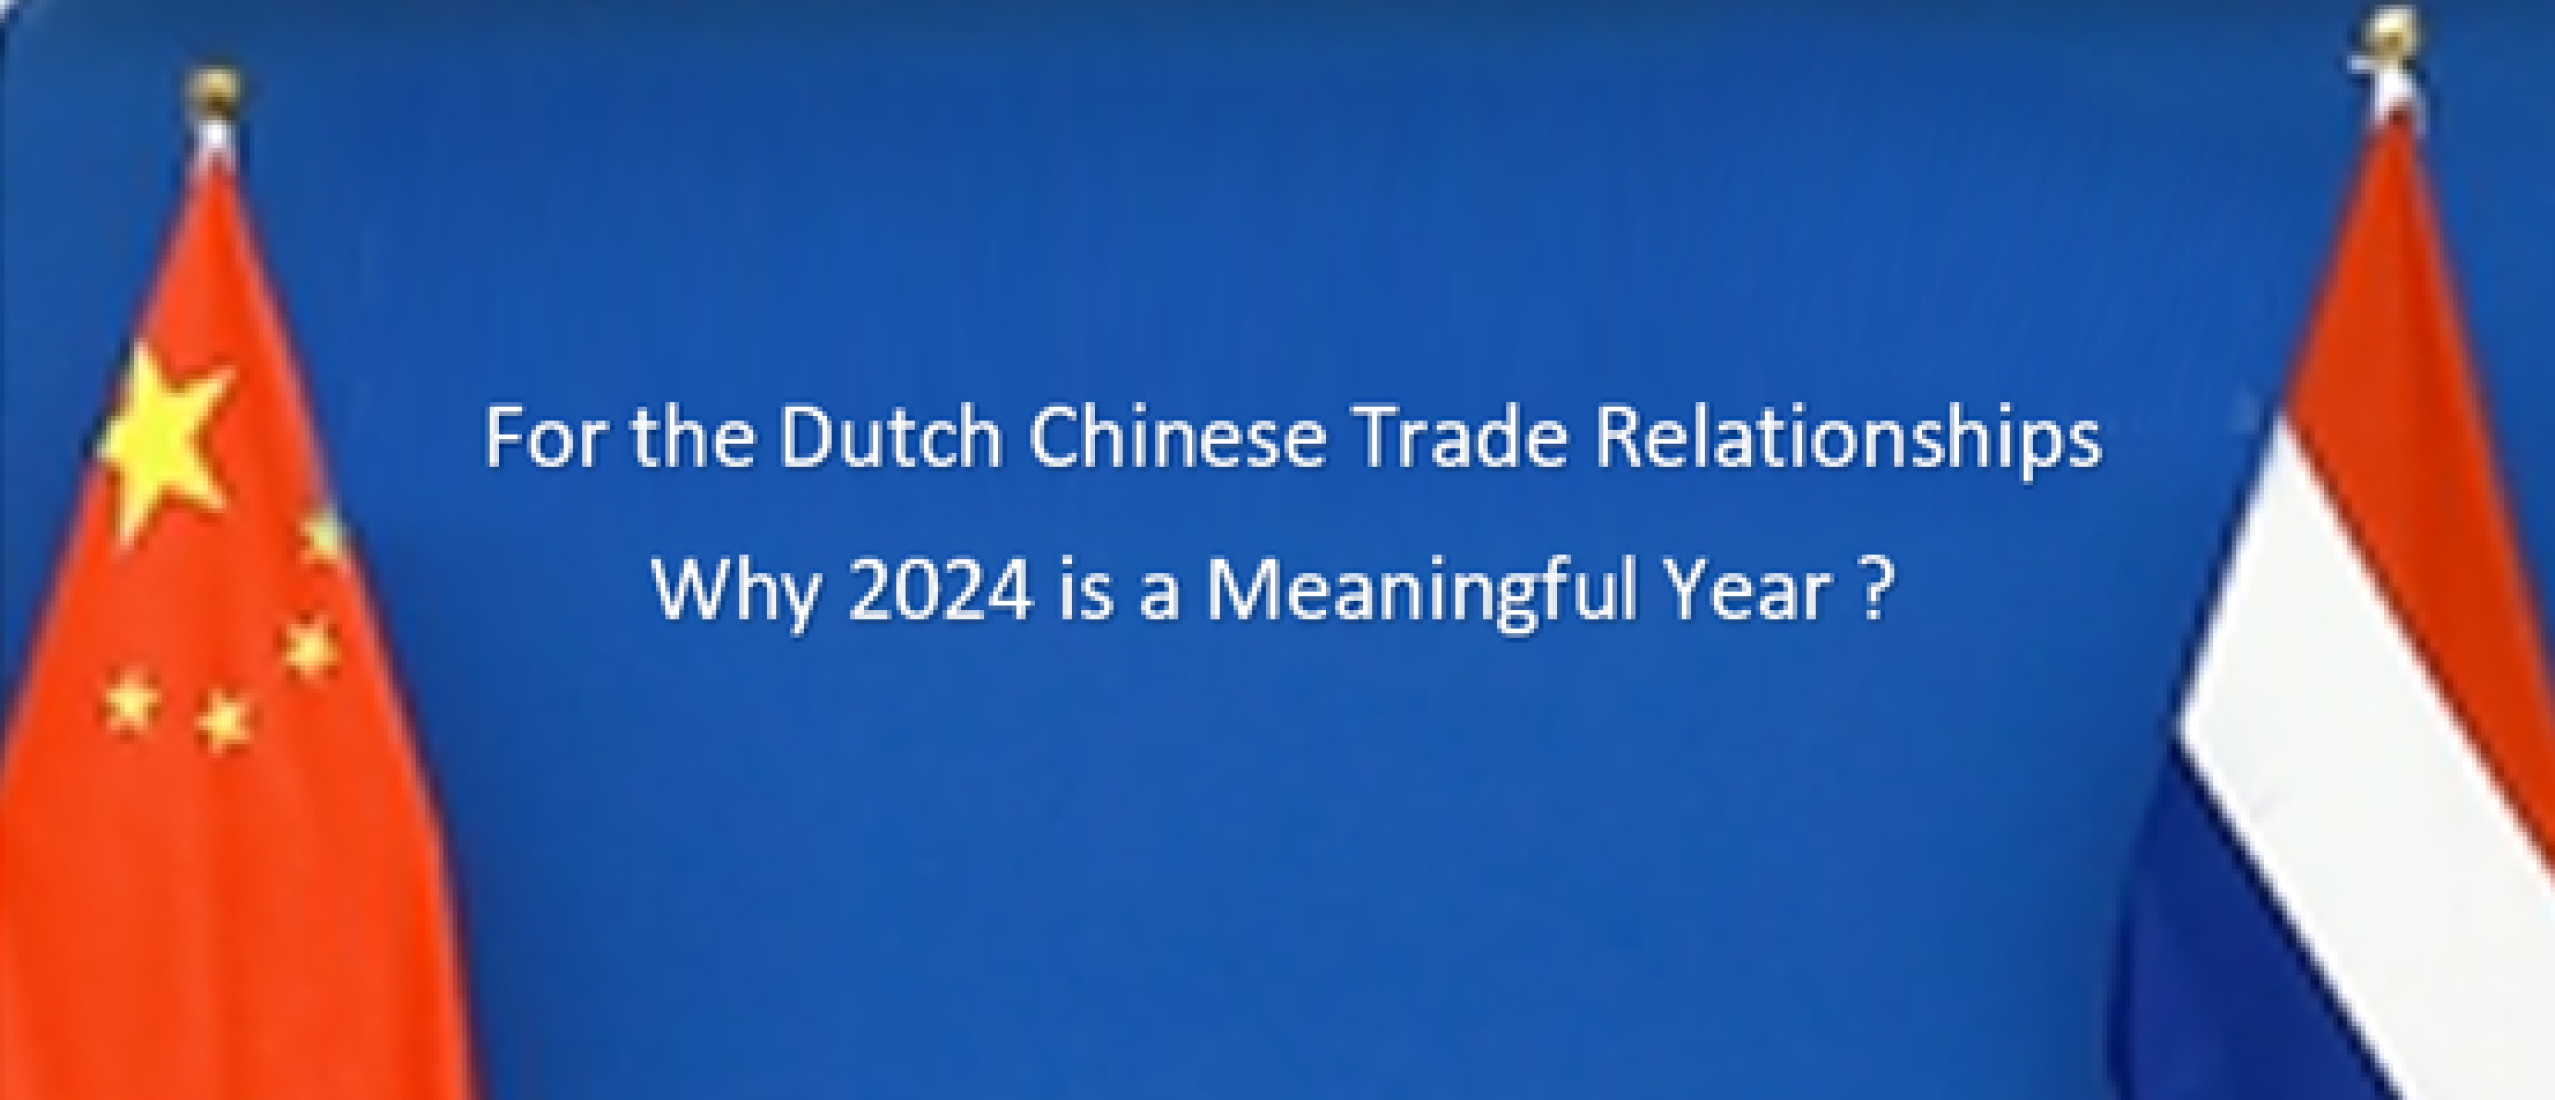 For the Dutch Chinese Trade Relationships - Why 2024 is A Meaningful Year?